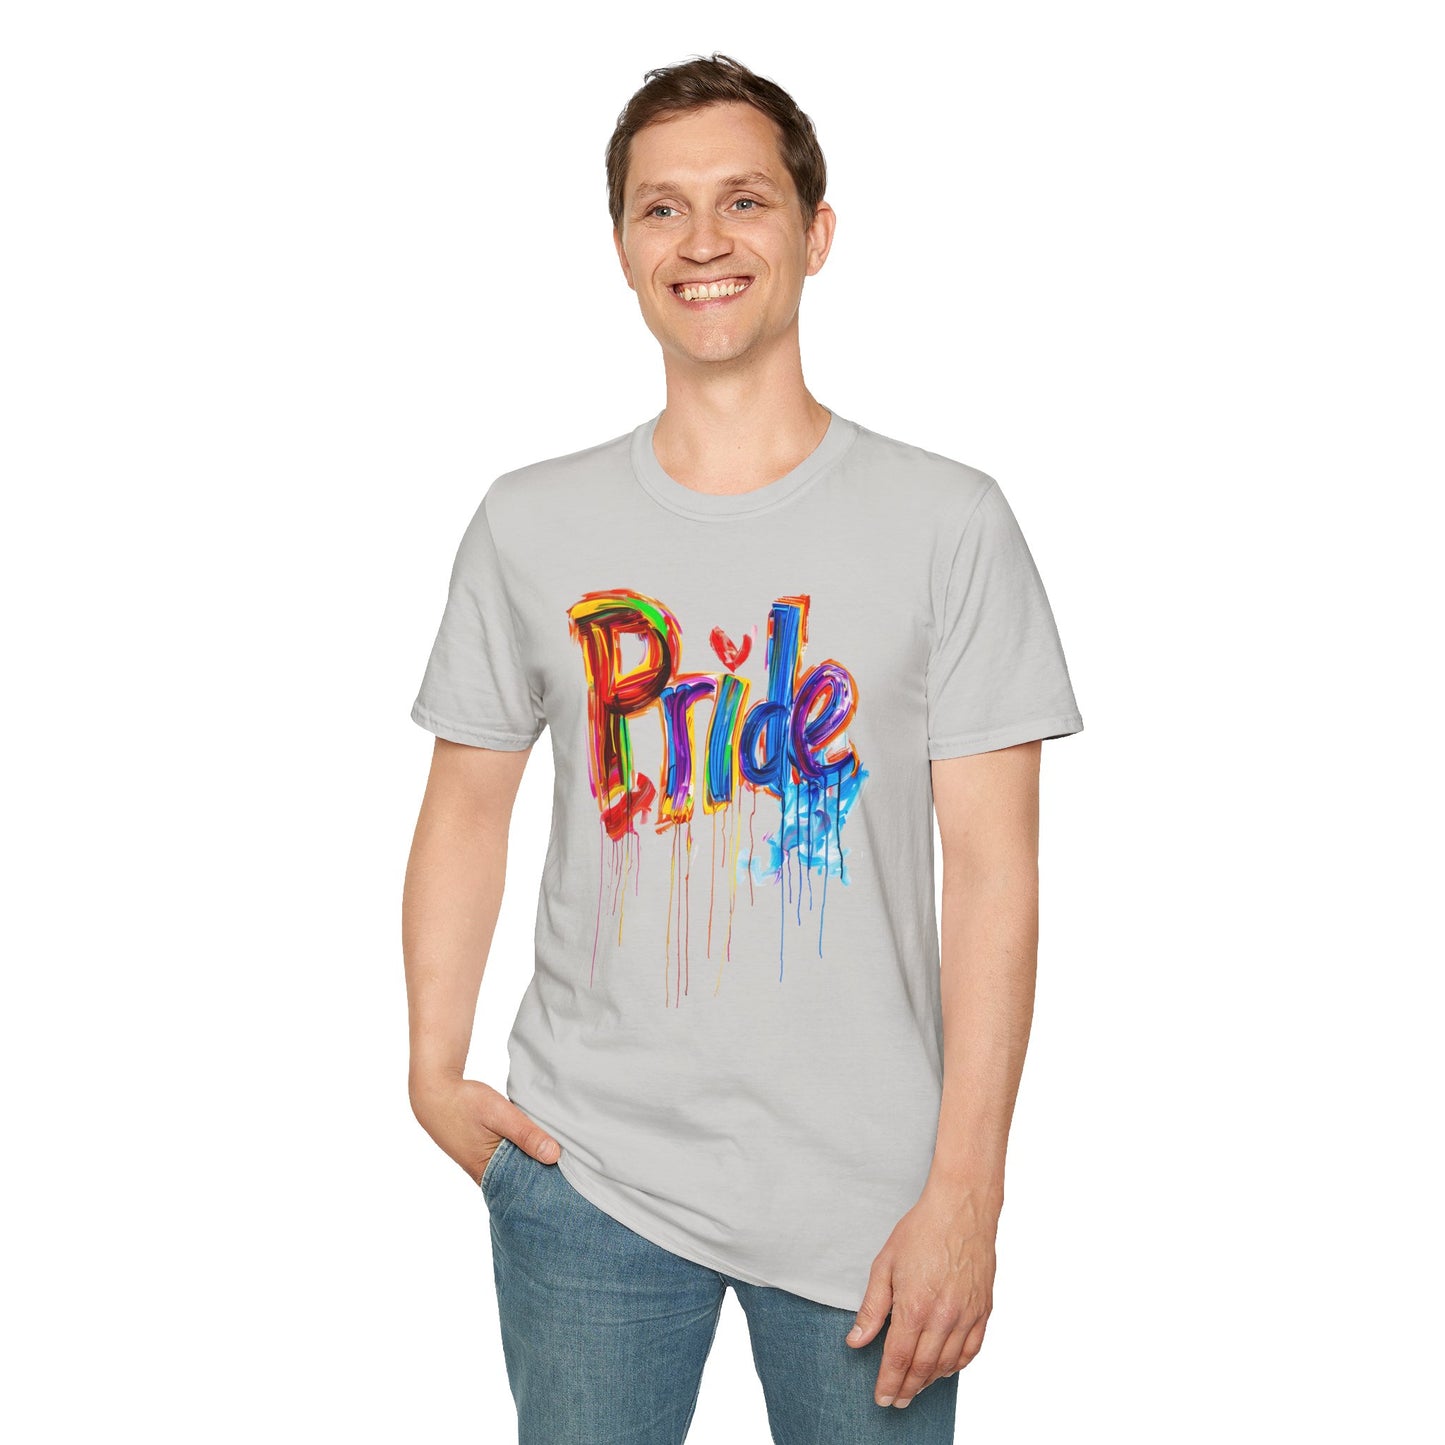 Pride in Full Color T-Shirt Proud Statement Shirt! Live With Pride!